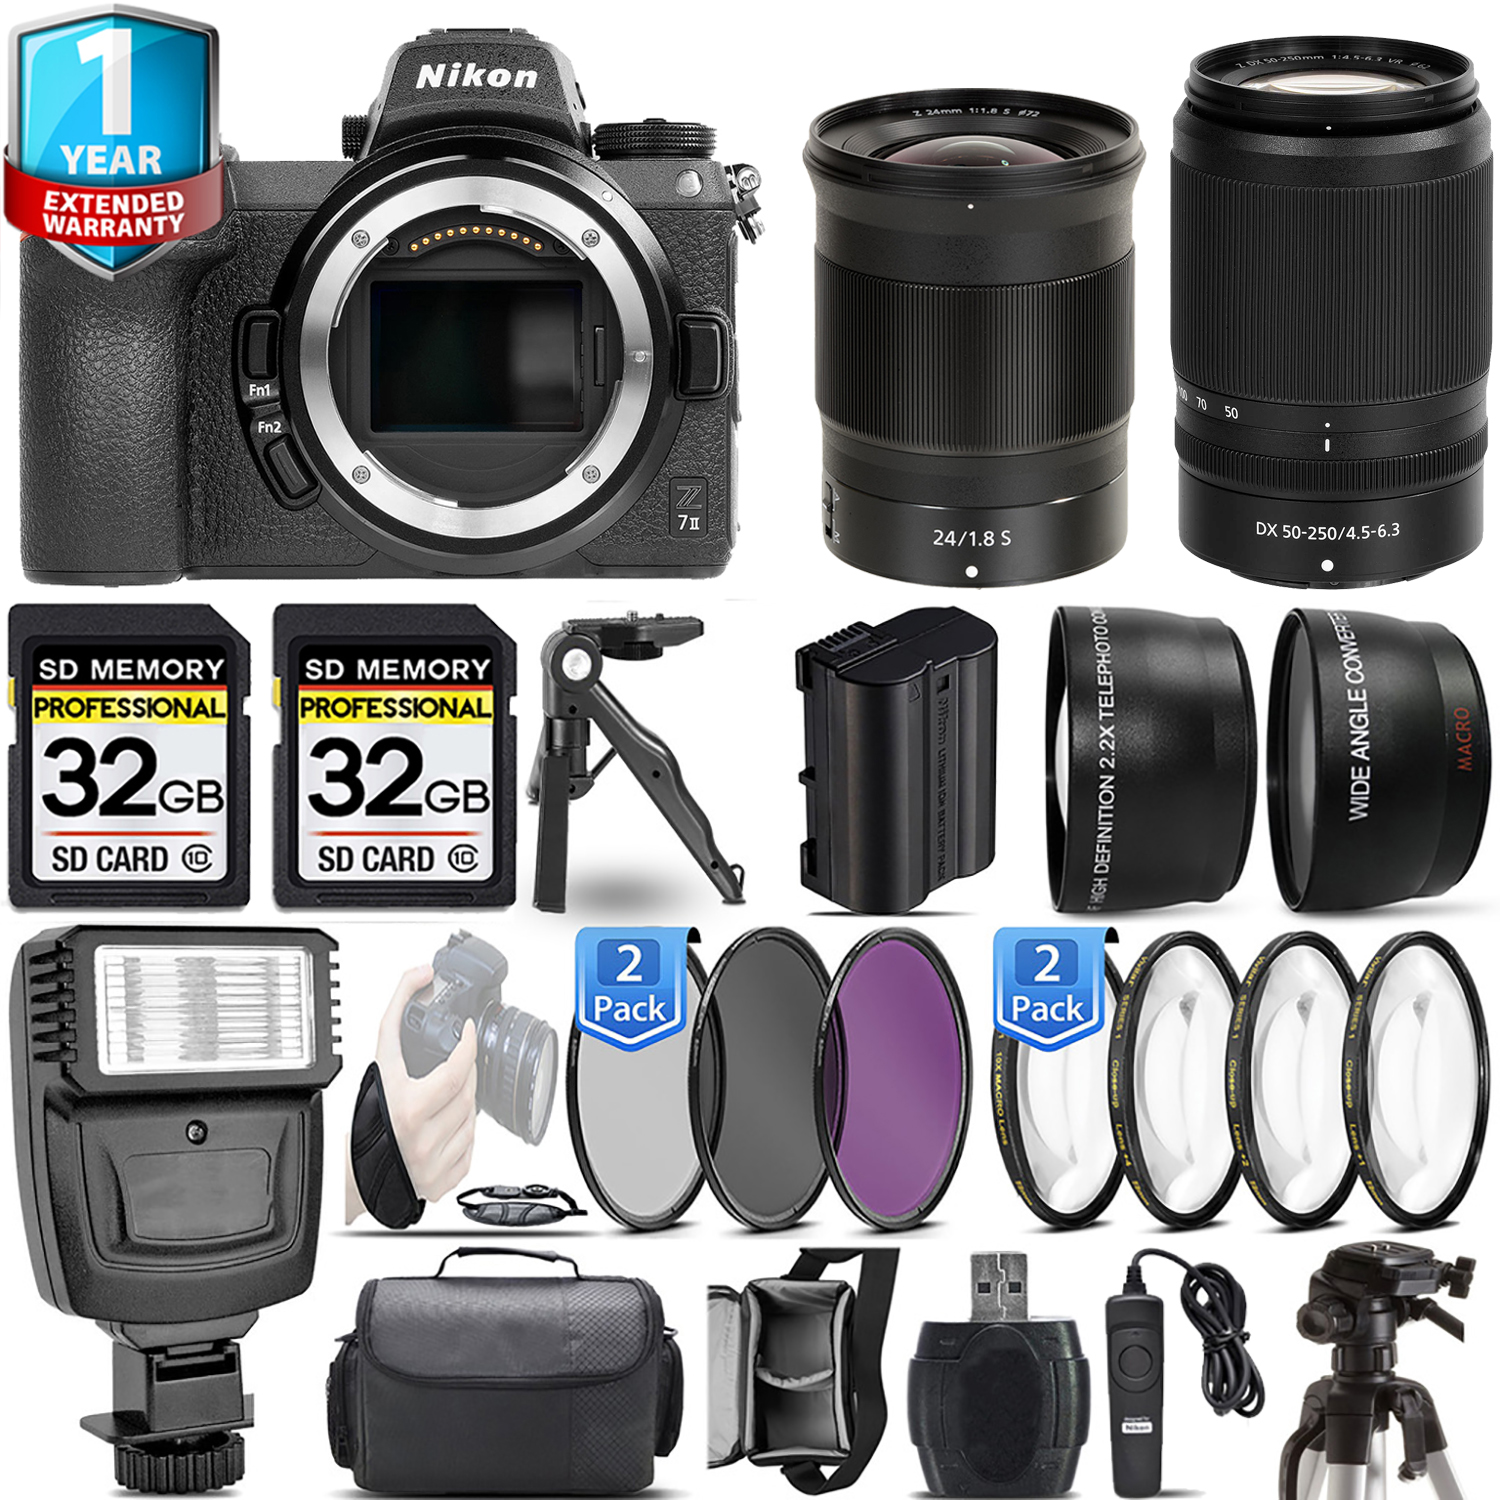 Z7 II Camera + 50-250mm + 24mm f/1.8 S Lens + 1 Year Extended Warranty + 64GB Basic Kit *FREE SHIPPING*